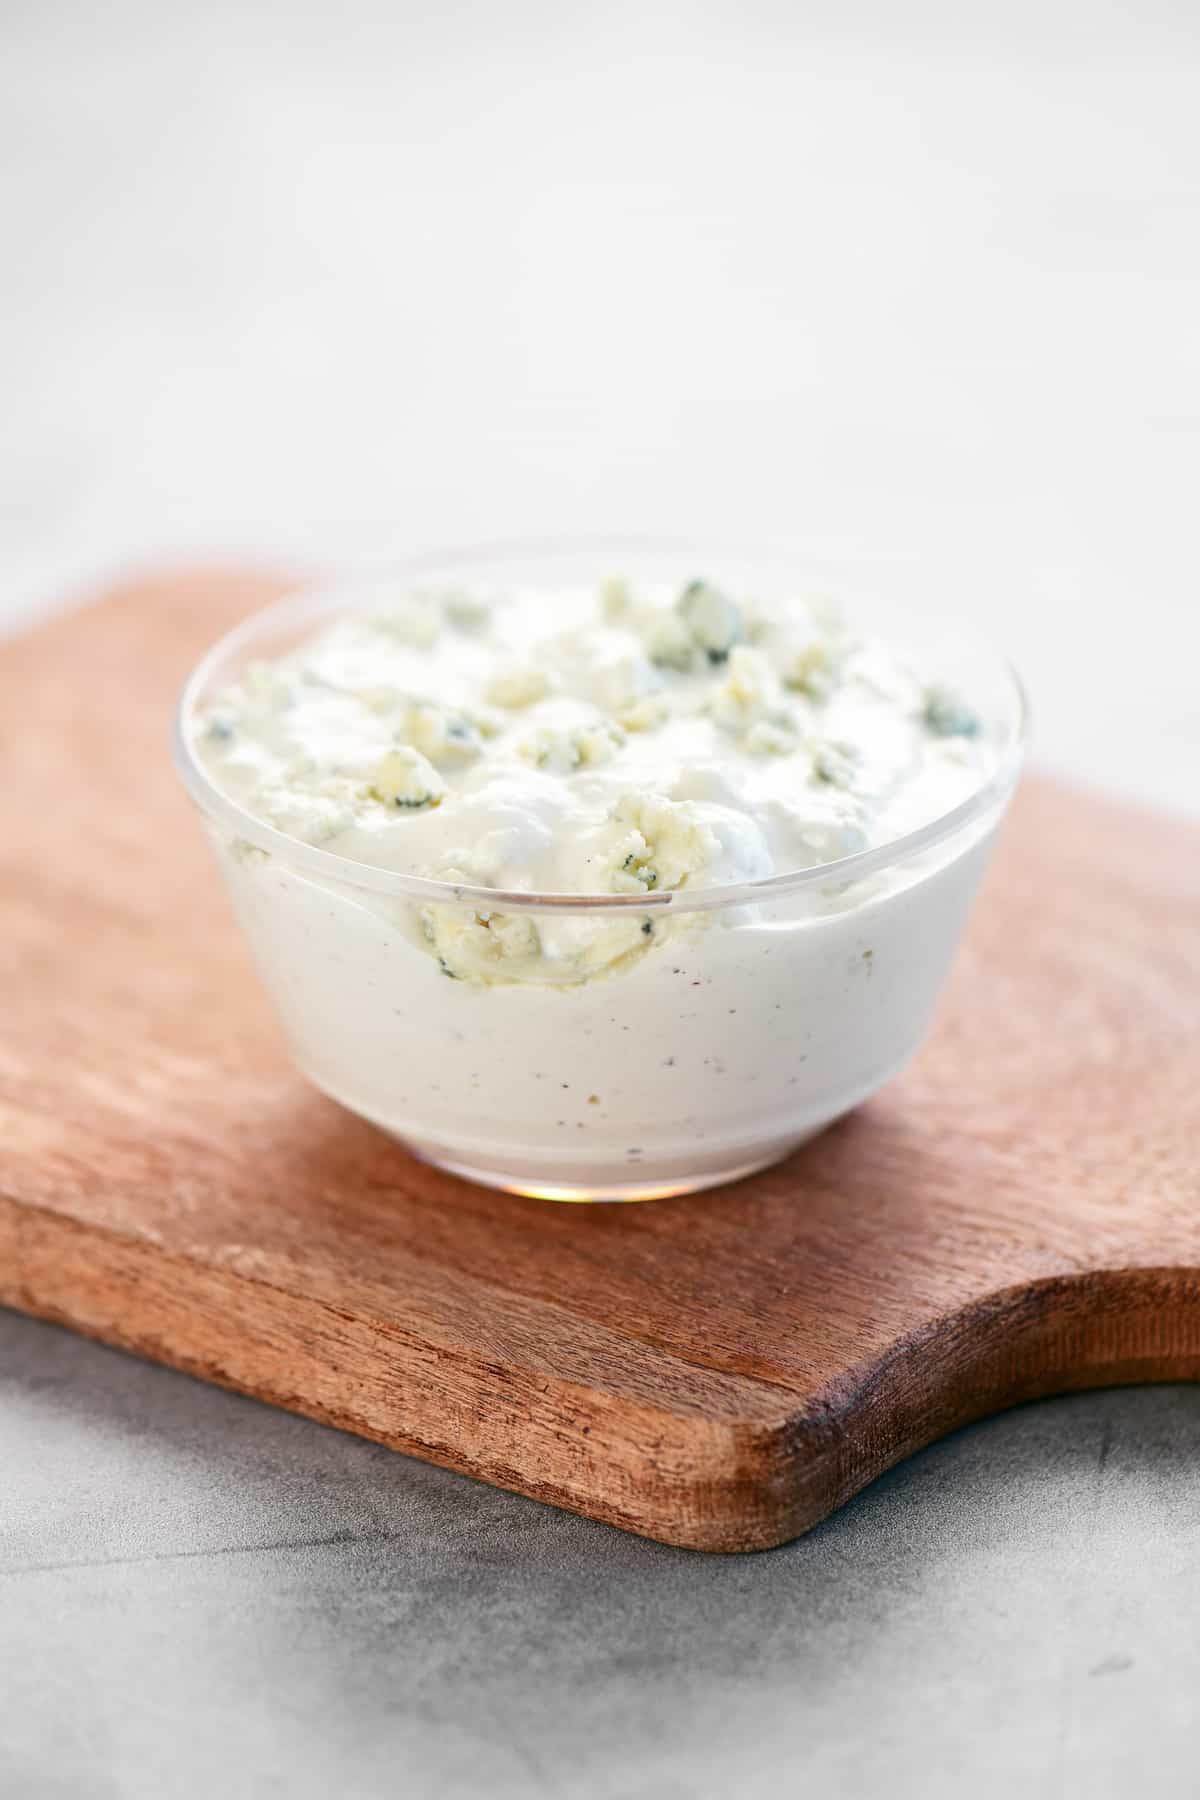 Blue Cheese sauce in a plastic dipping bowl.